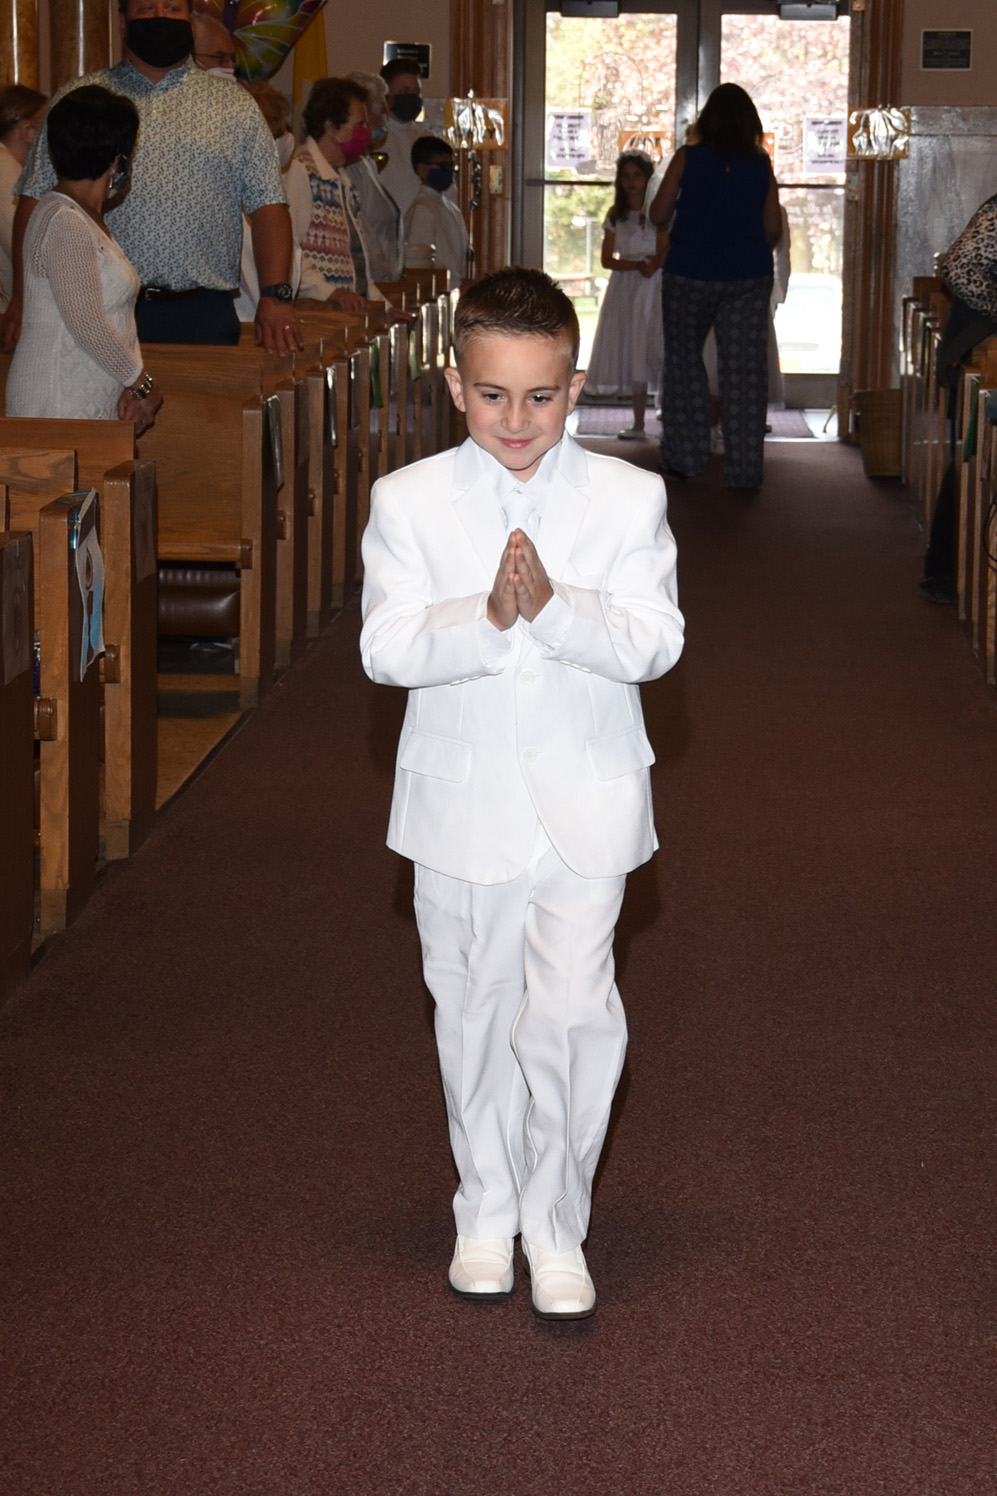 FIRST-COMMUNION-MAY-15-2021-10011052